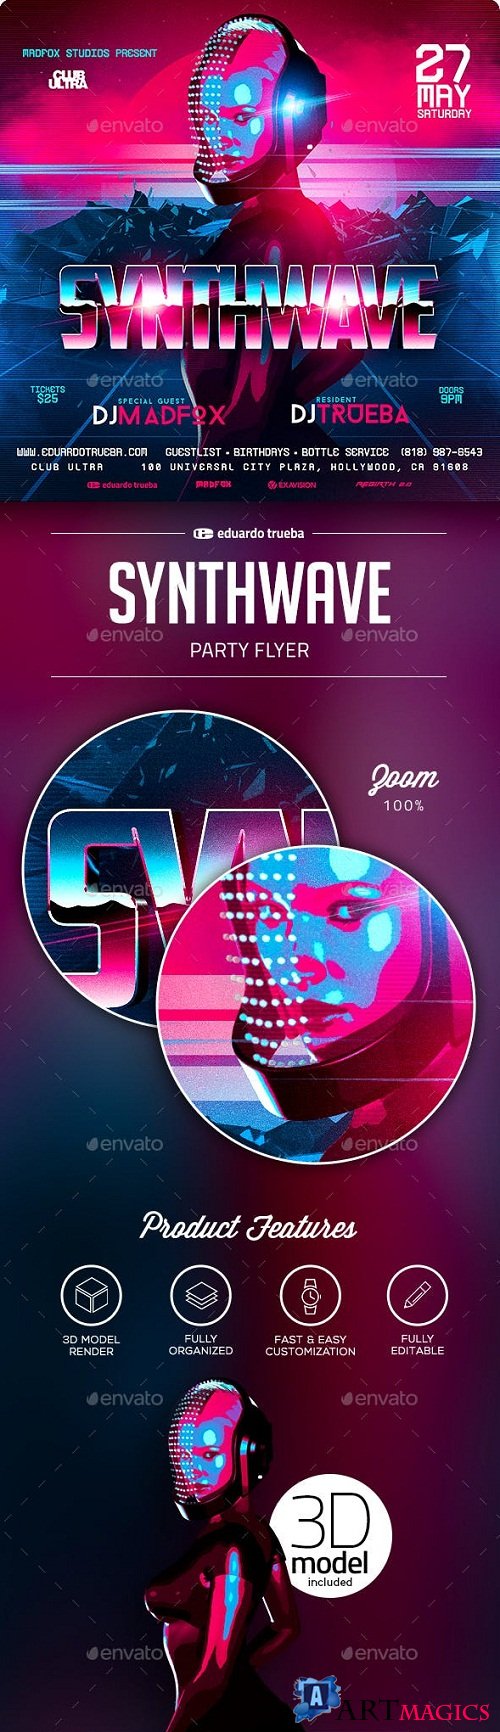 Synthwave Retro Party Flyer 23130675